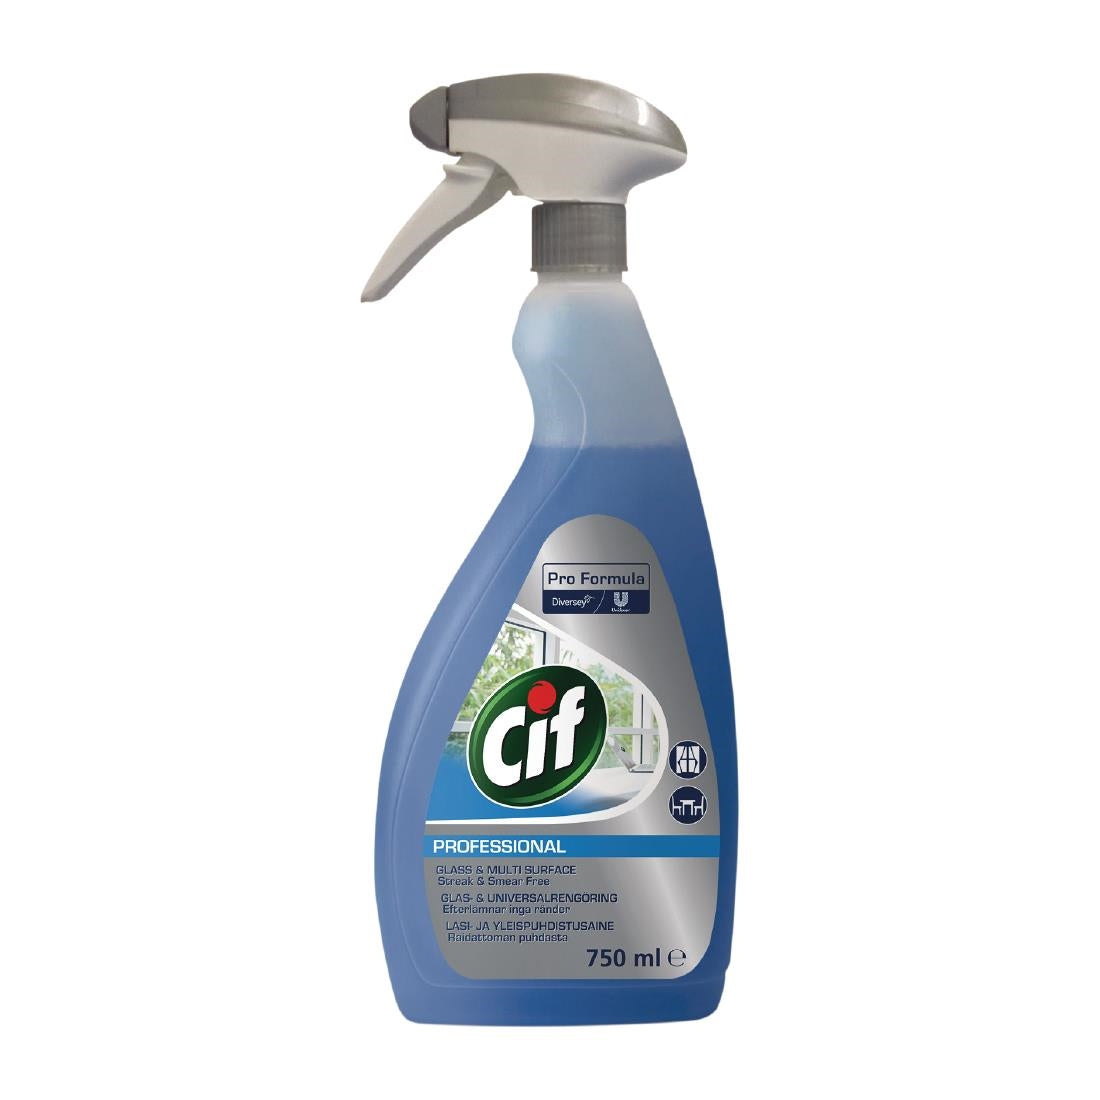 CX862 Cif Pro Formula Window and Multi-Surface Cleaner Ready To Use 750ml JD Catering Equipment Solutions Ltd